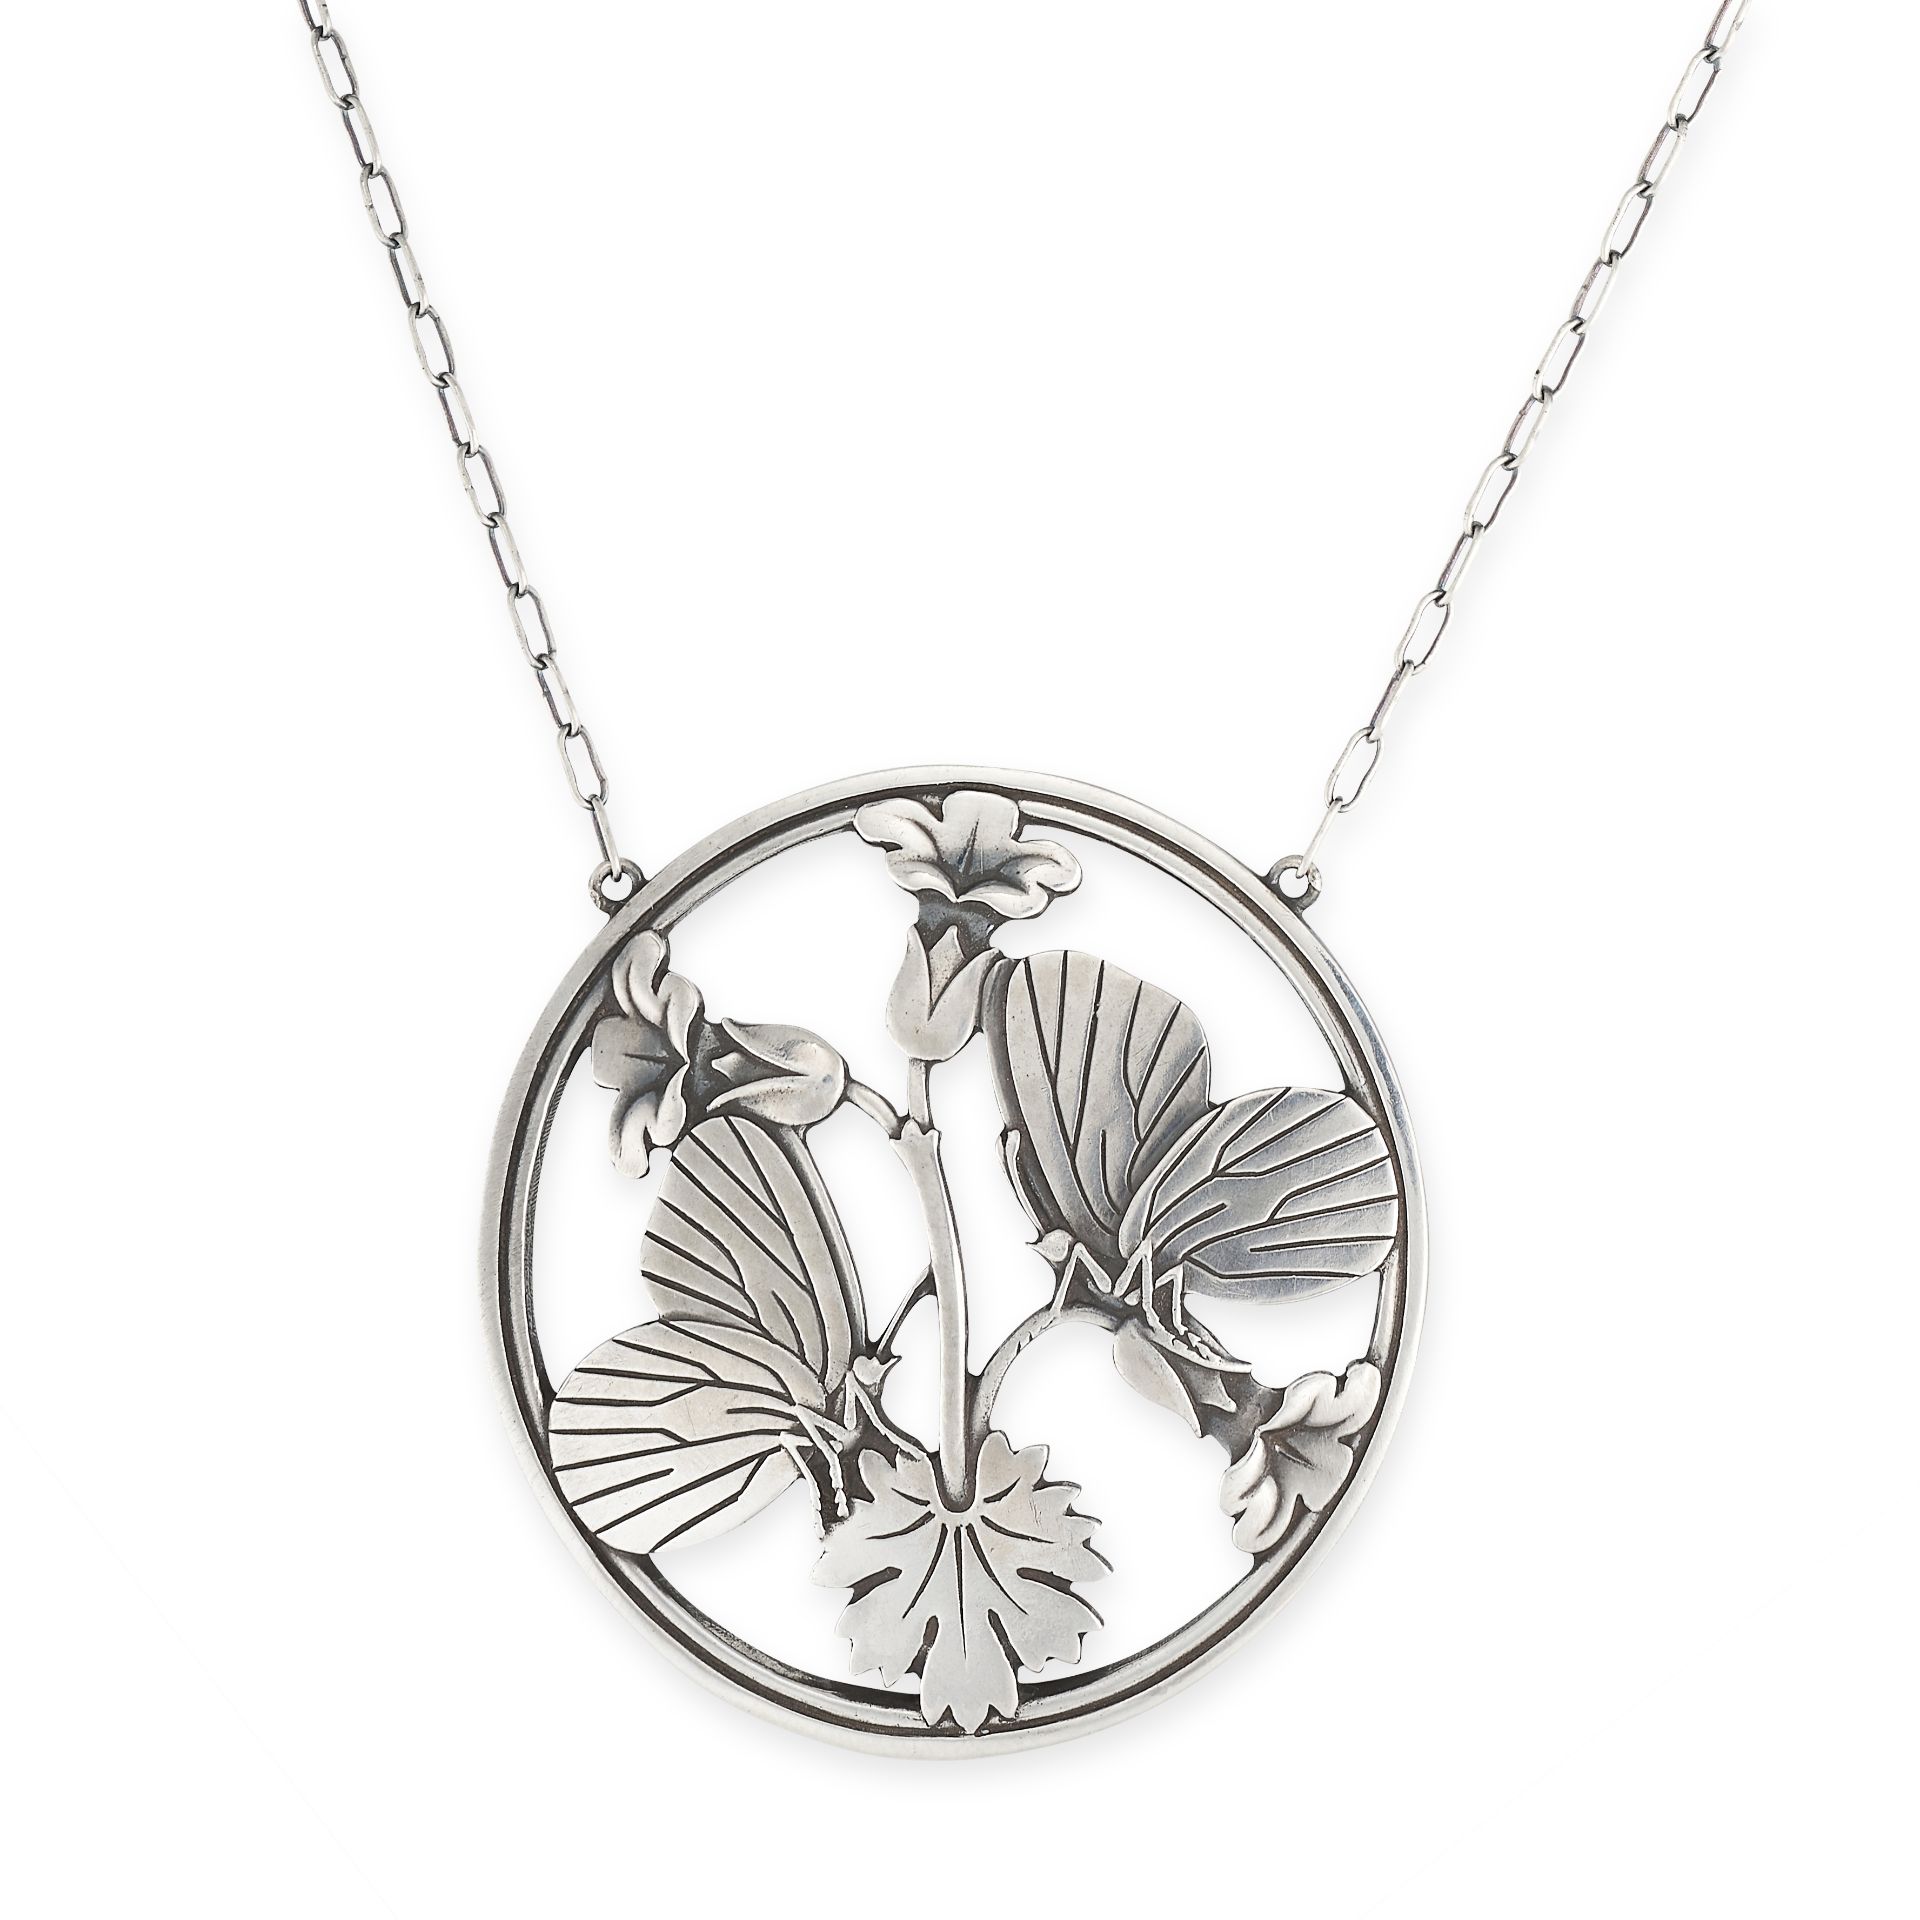 NO RESERVE - GEORG JENSEN, A VINTAGE SILVER GERANIUM AND BUTTERFLY MEDALLION PENDANT designed by ...